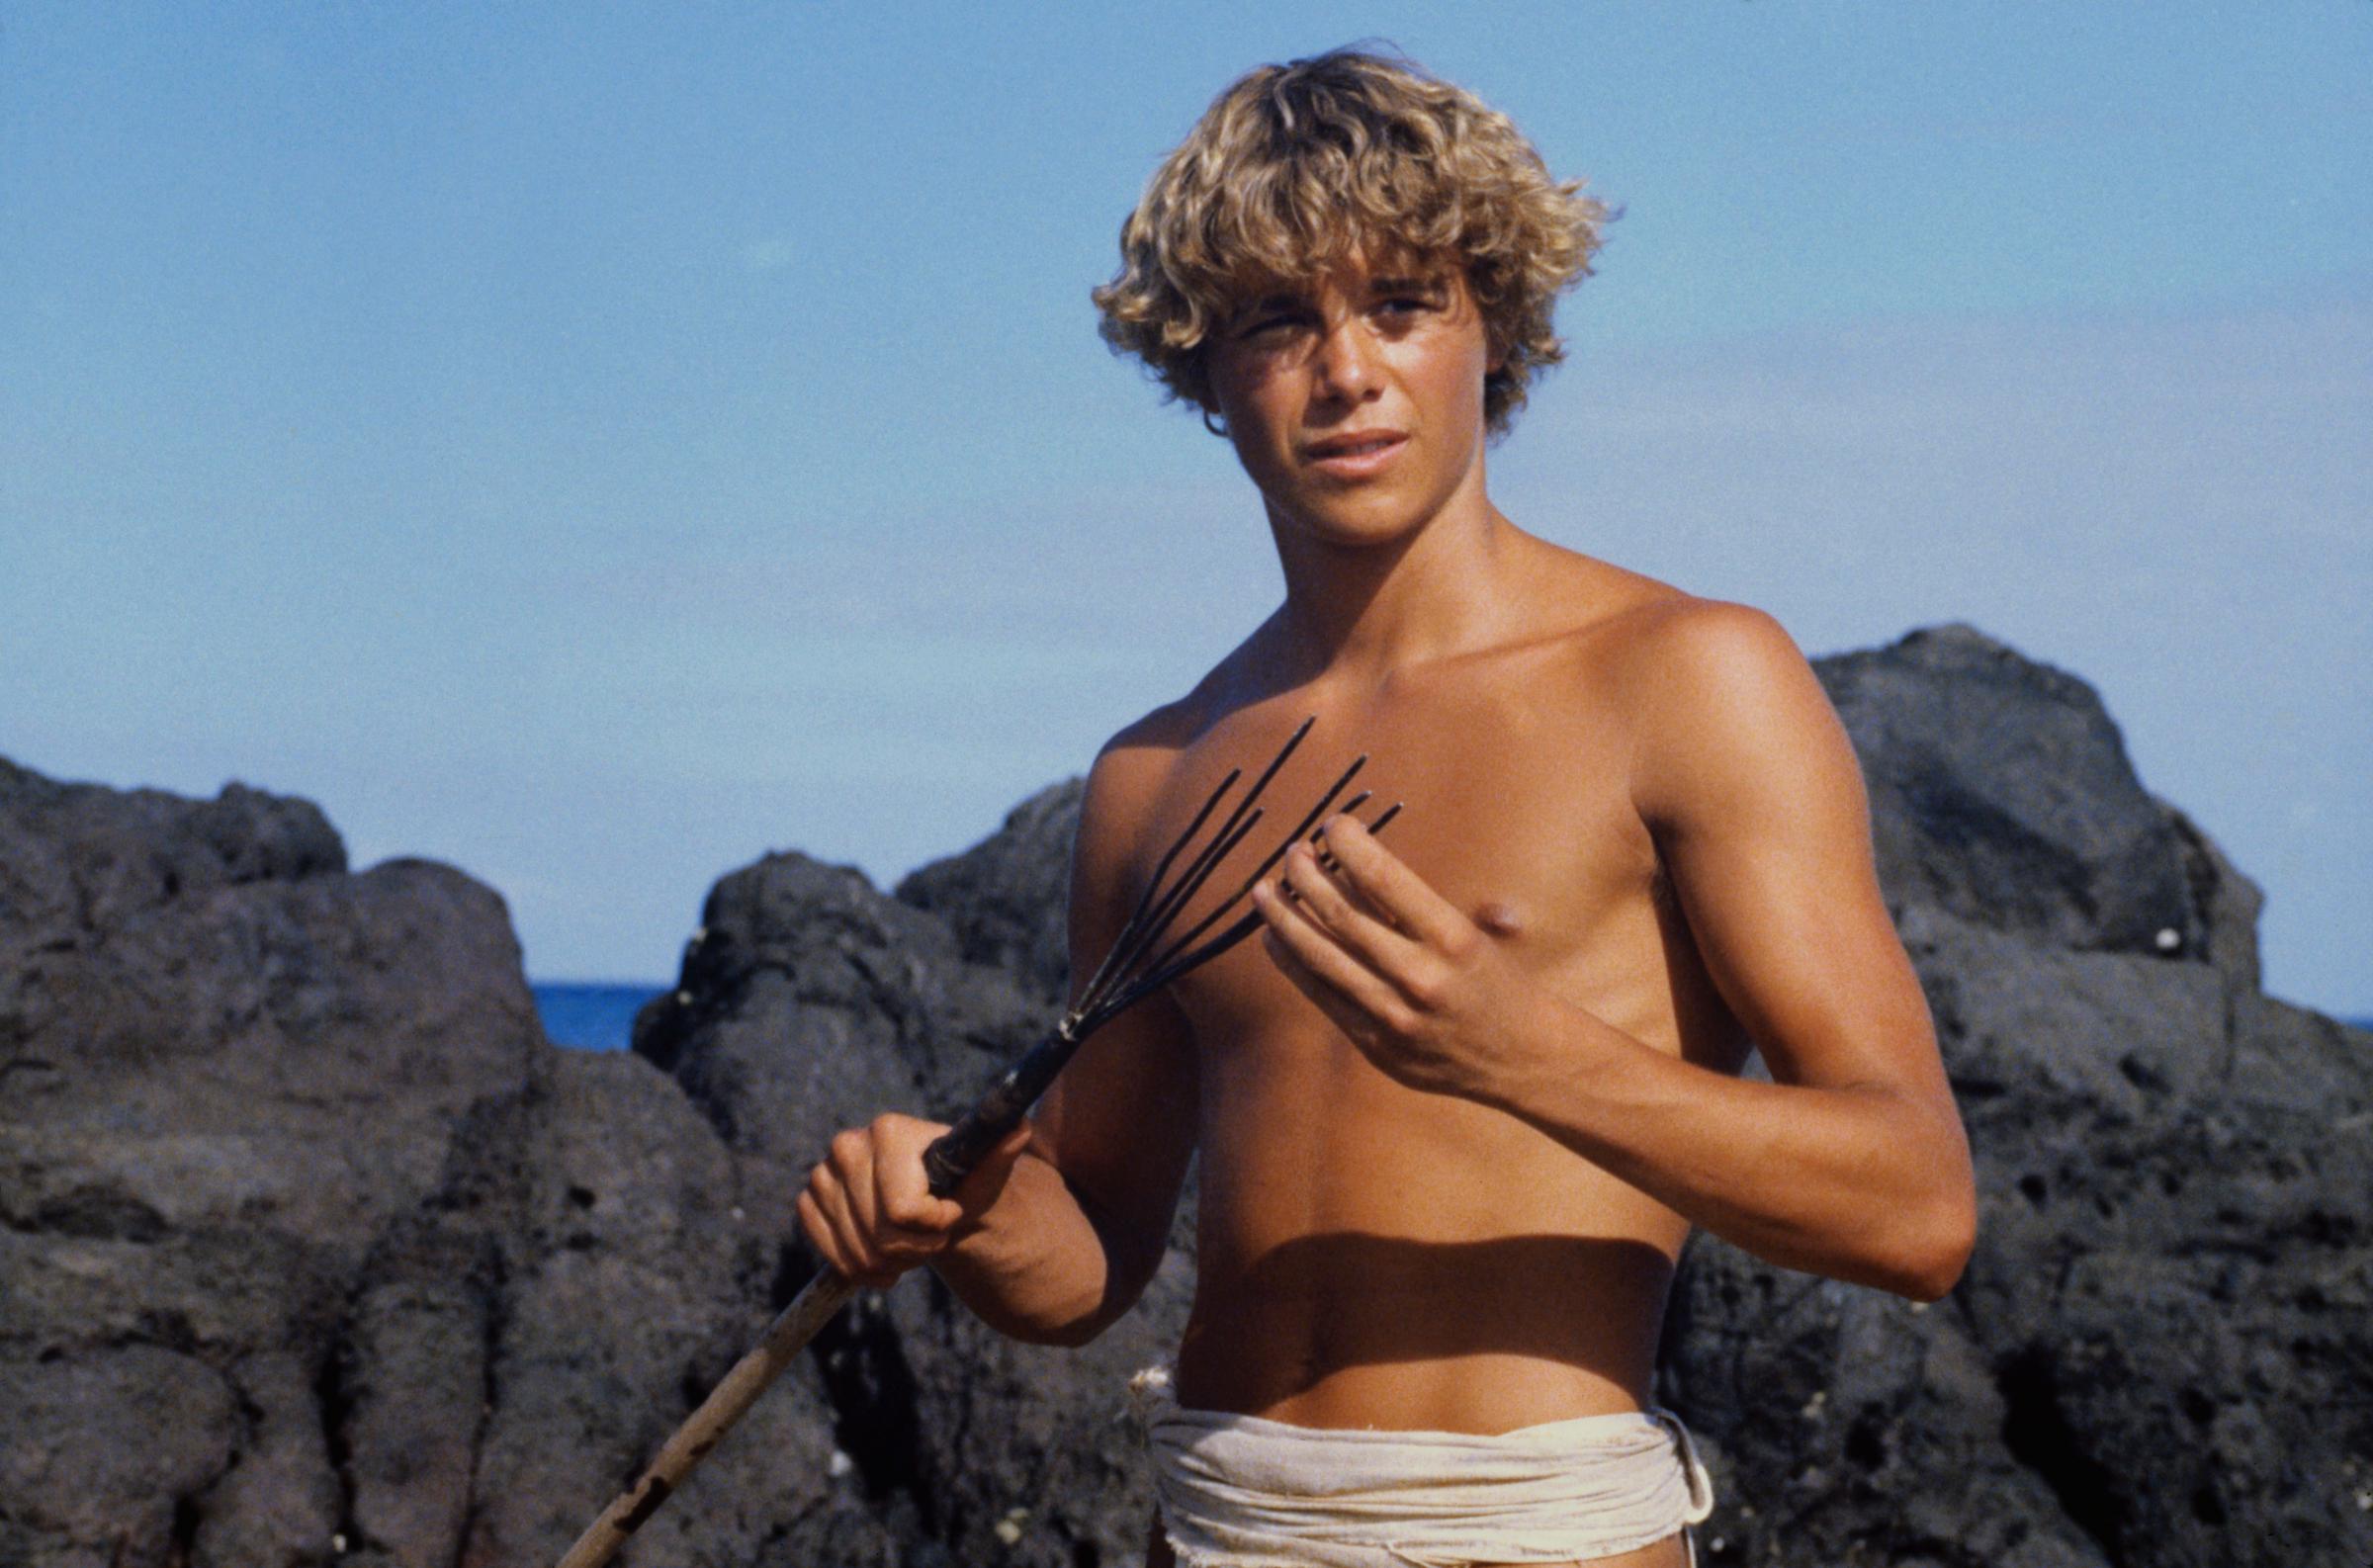 Christopher Atkins during the filming of "The Blue Lagoon," circa 1980. | Source: Getty Images